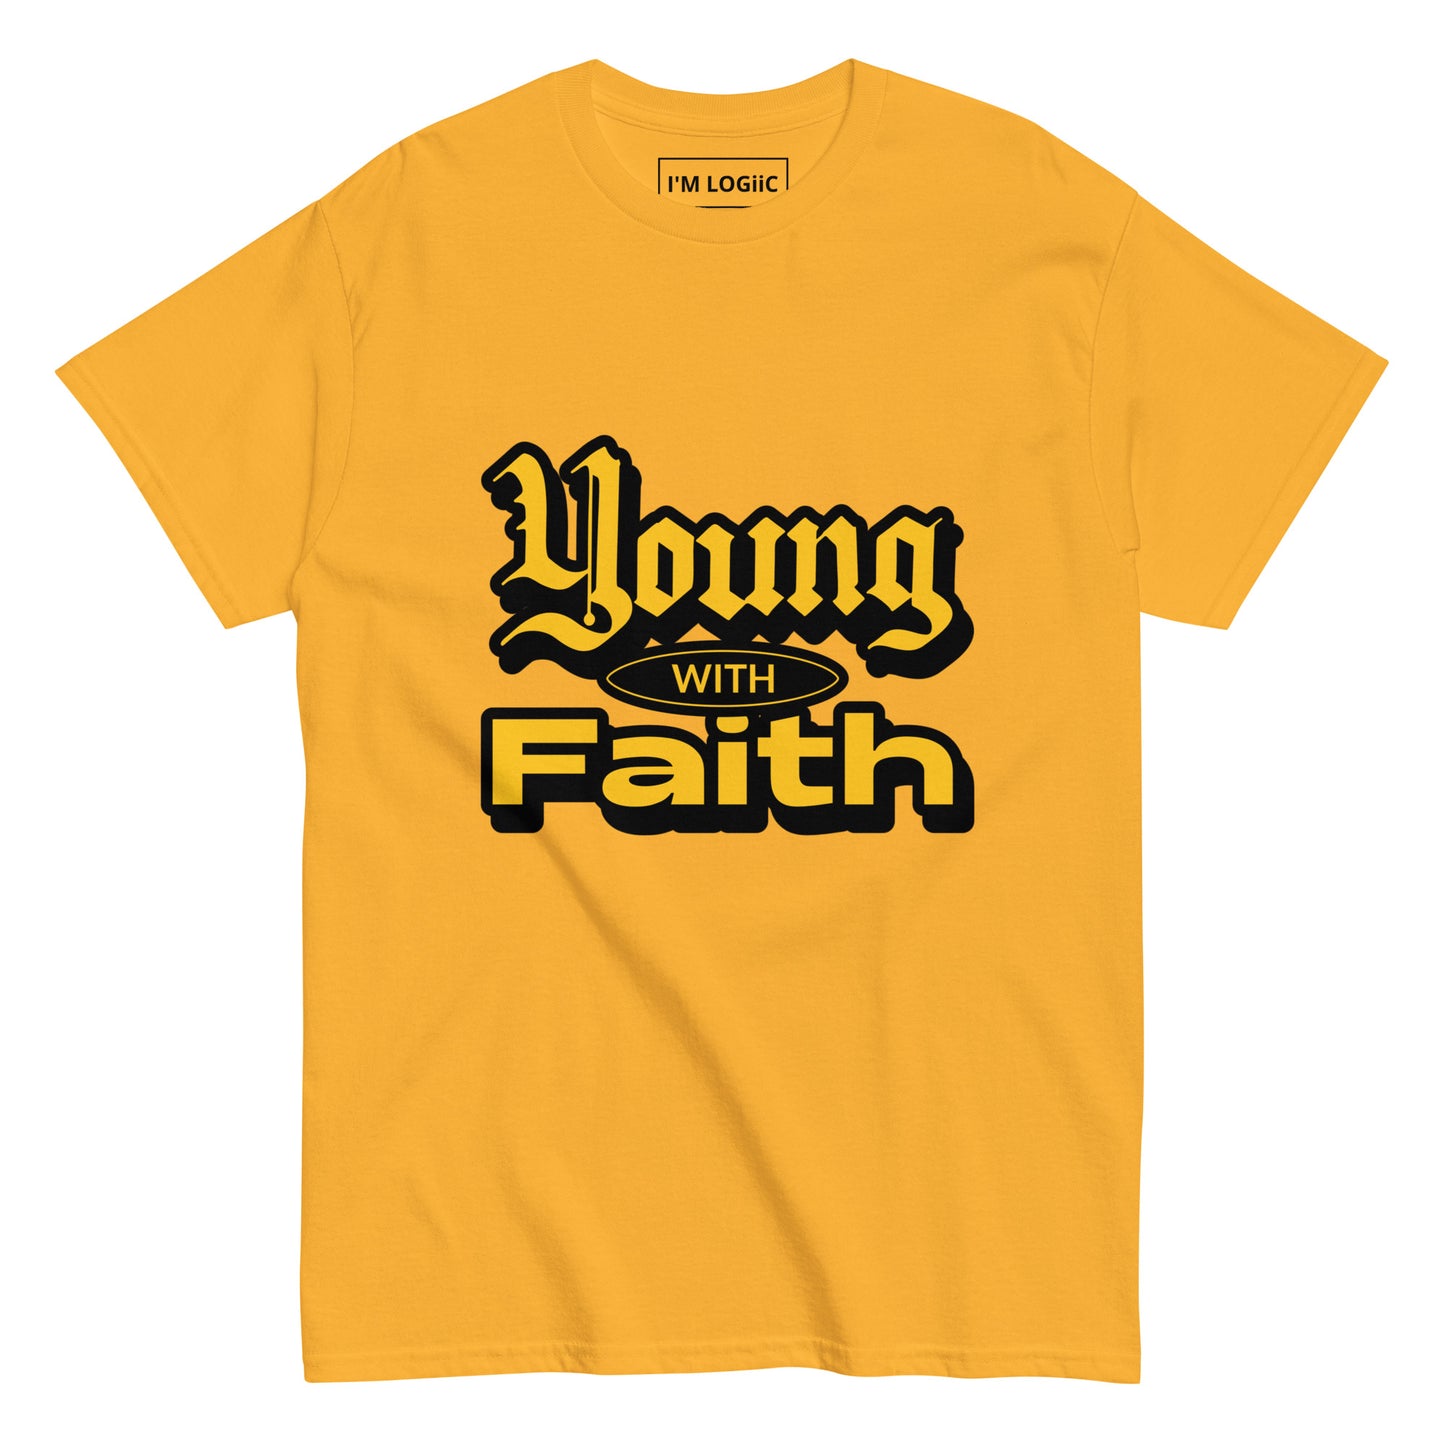 Young with Faith classic tee